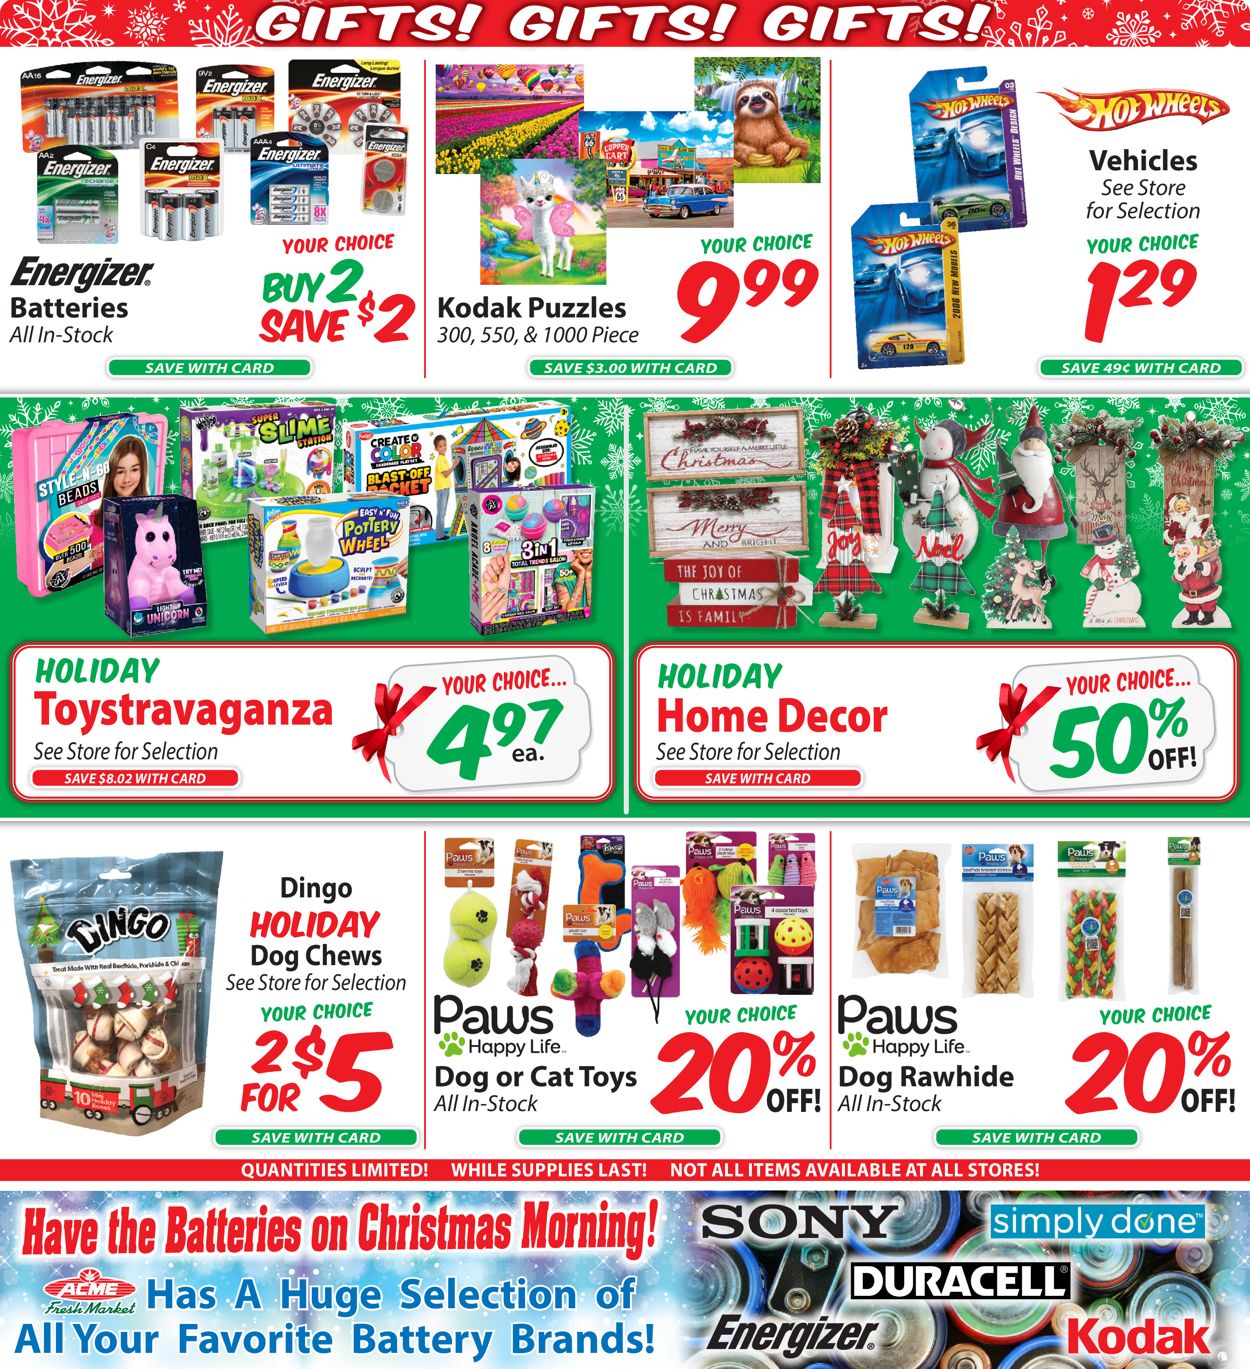 Acme Fresh Market Ad from 12/16/2021